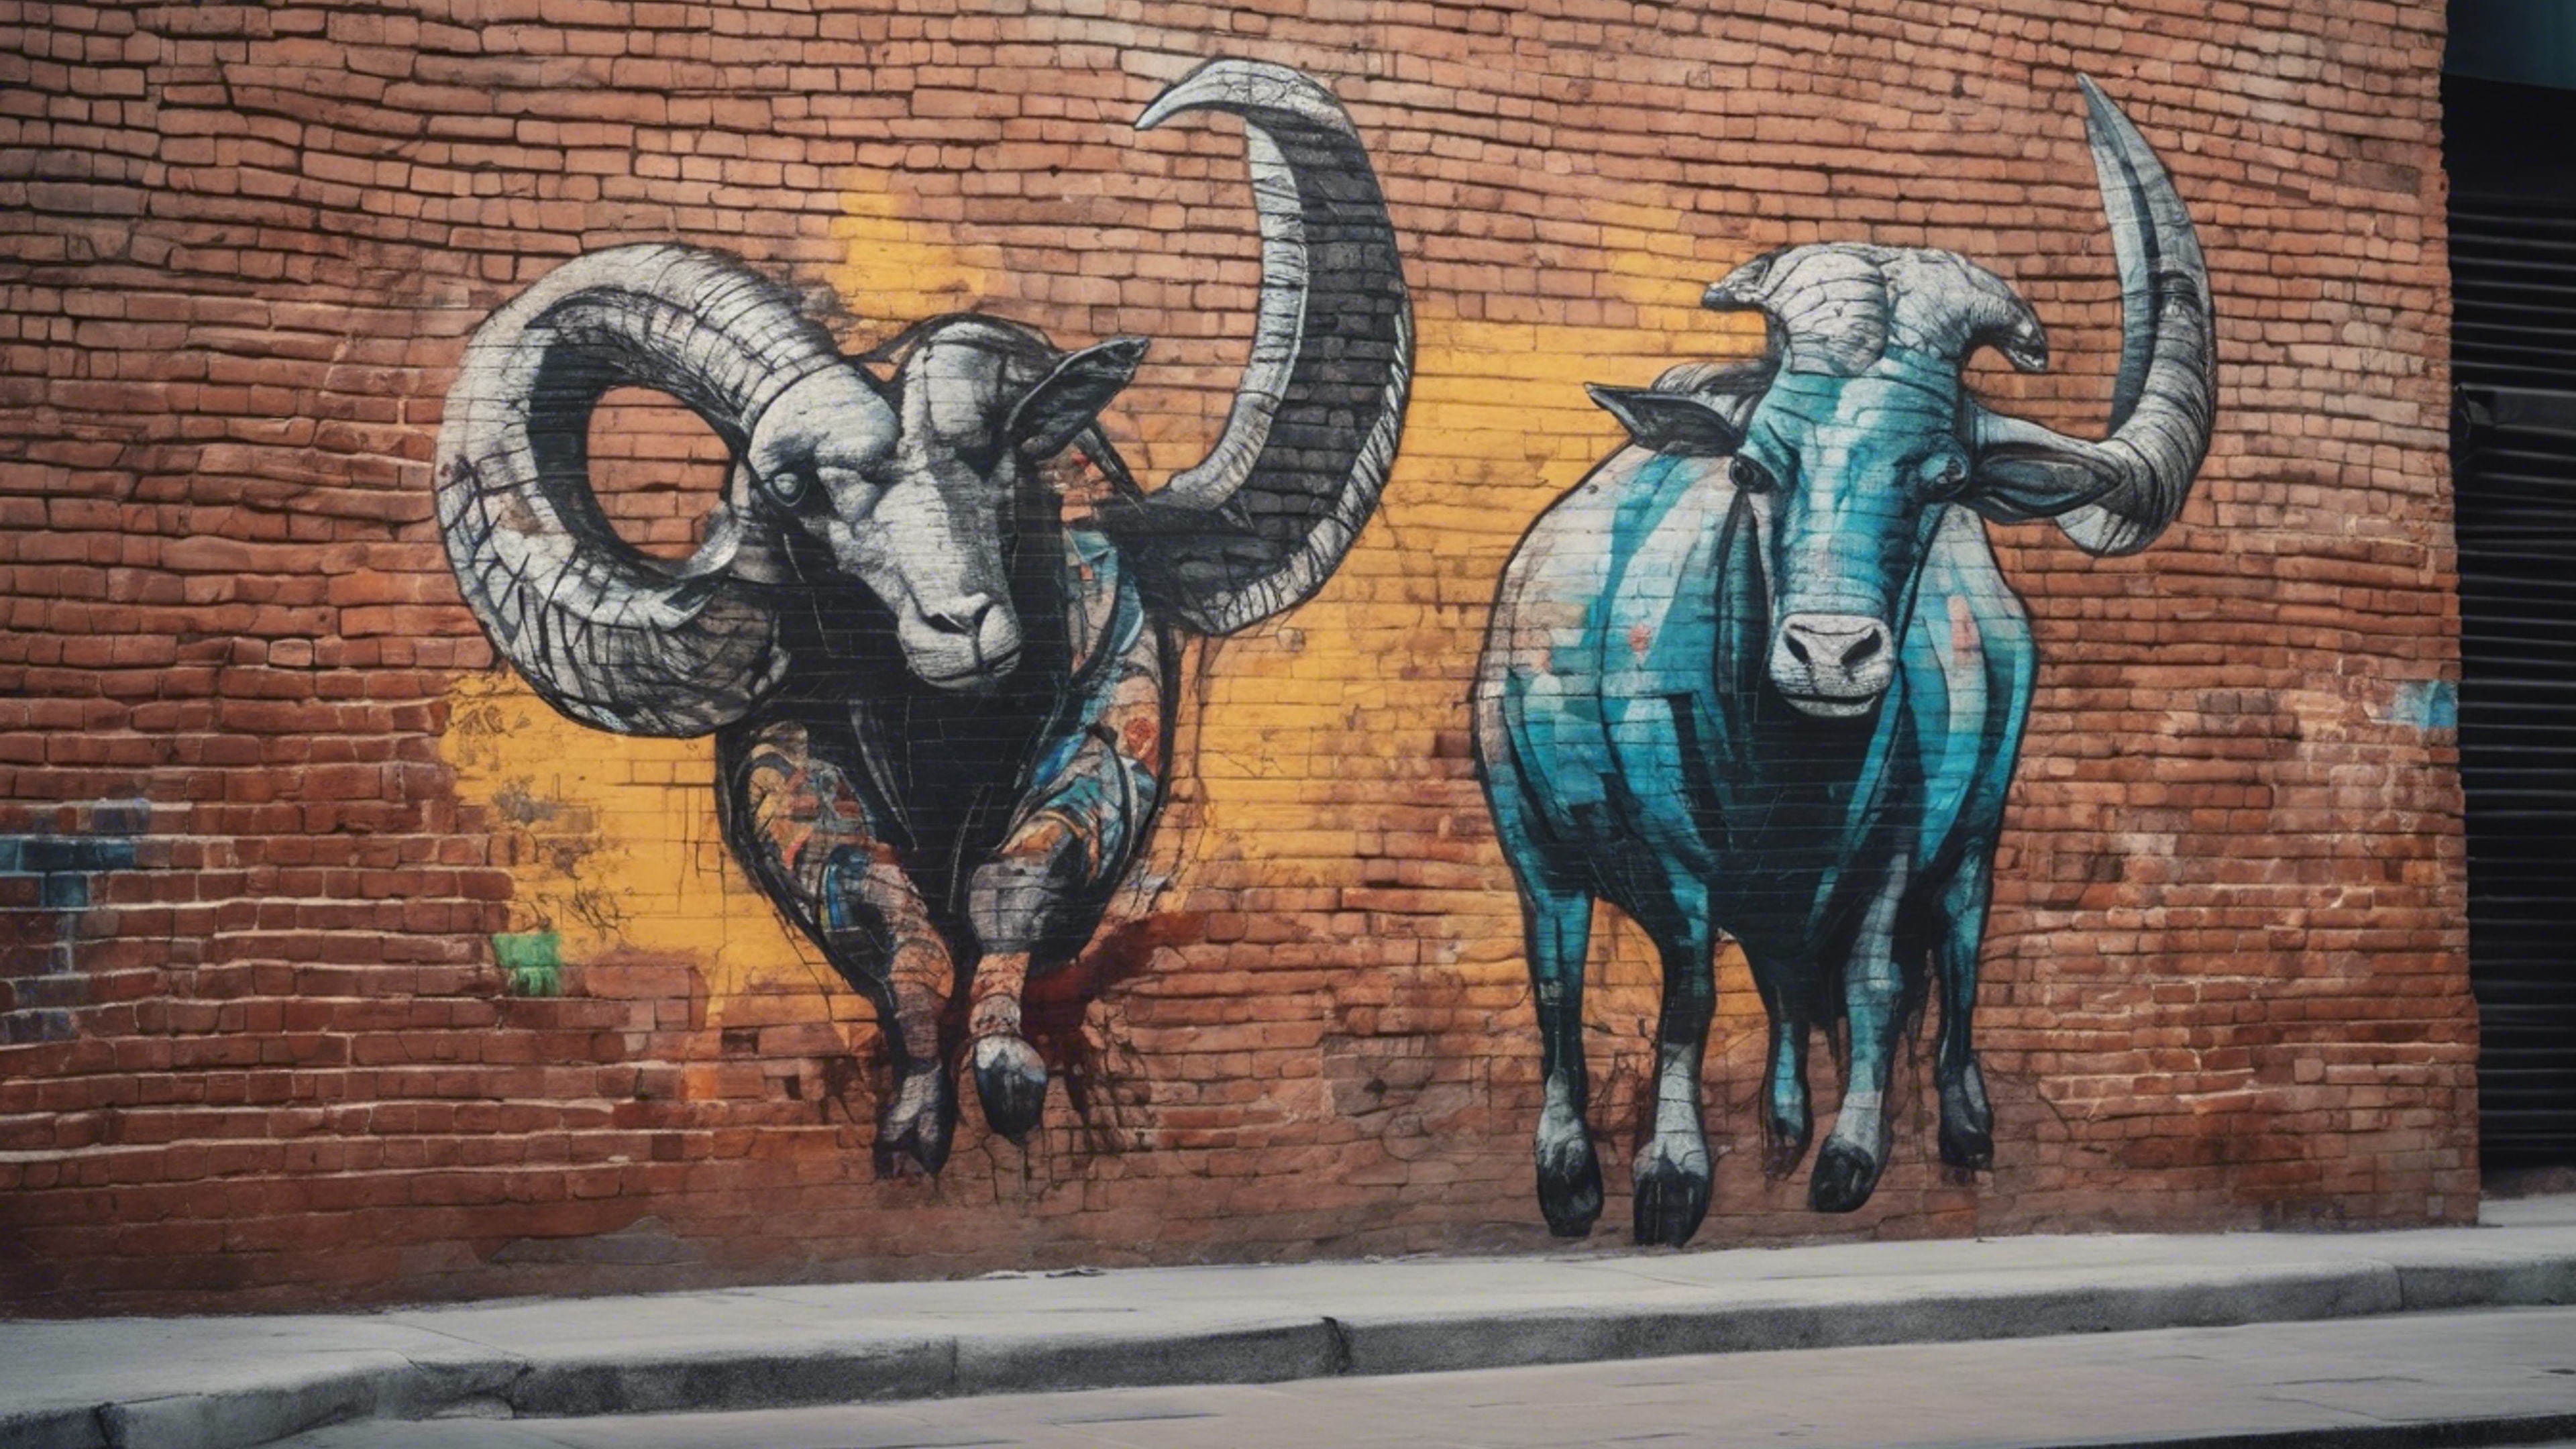 A Capricorn painted as street art on a brick wall in a busy city street. 墙纸[8124c45194ee4830b5c7]